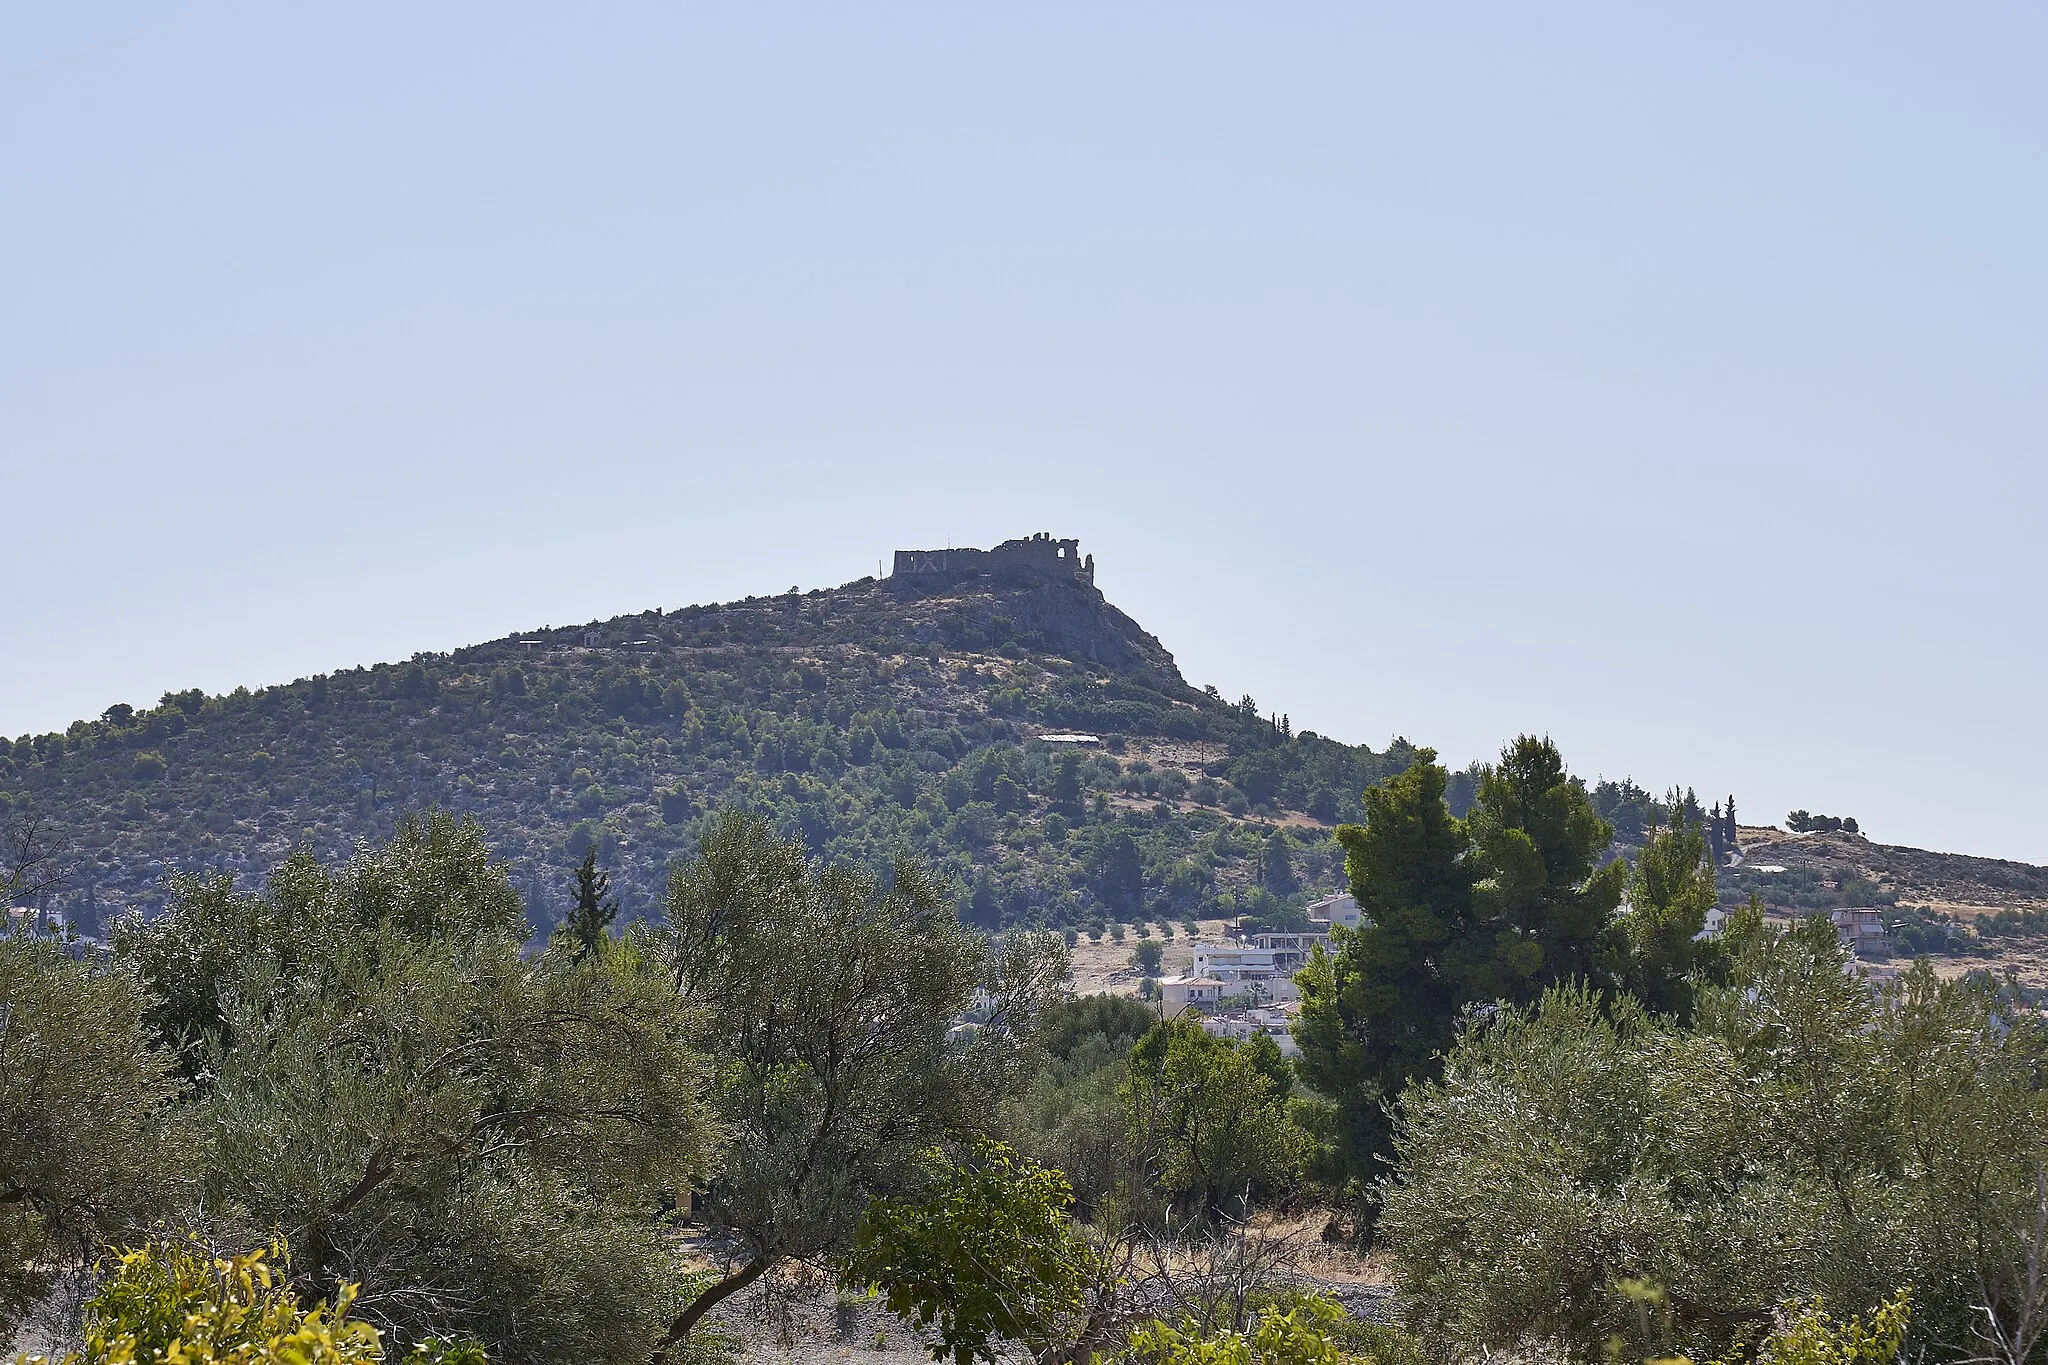 Photo showing: The castle of the knight Licario over the village Fylla in Euboea. The locals call it Kastelli. It dates to the 13th century A.D. Licario was a knight of Italian origin from Karystos in the service of the Byzantine emperor Michael VIII Palaiologos. This castle was his residence.